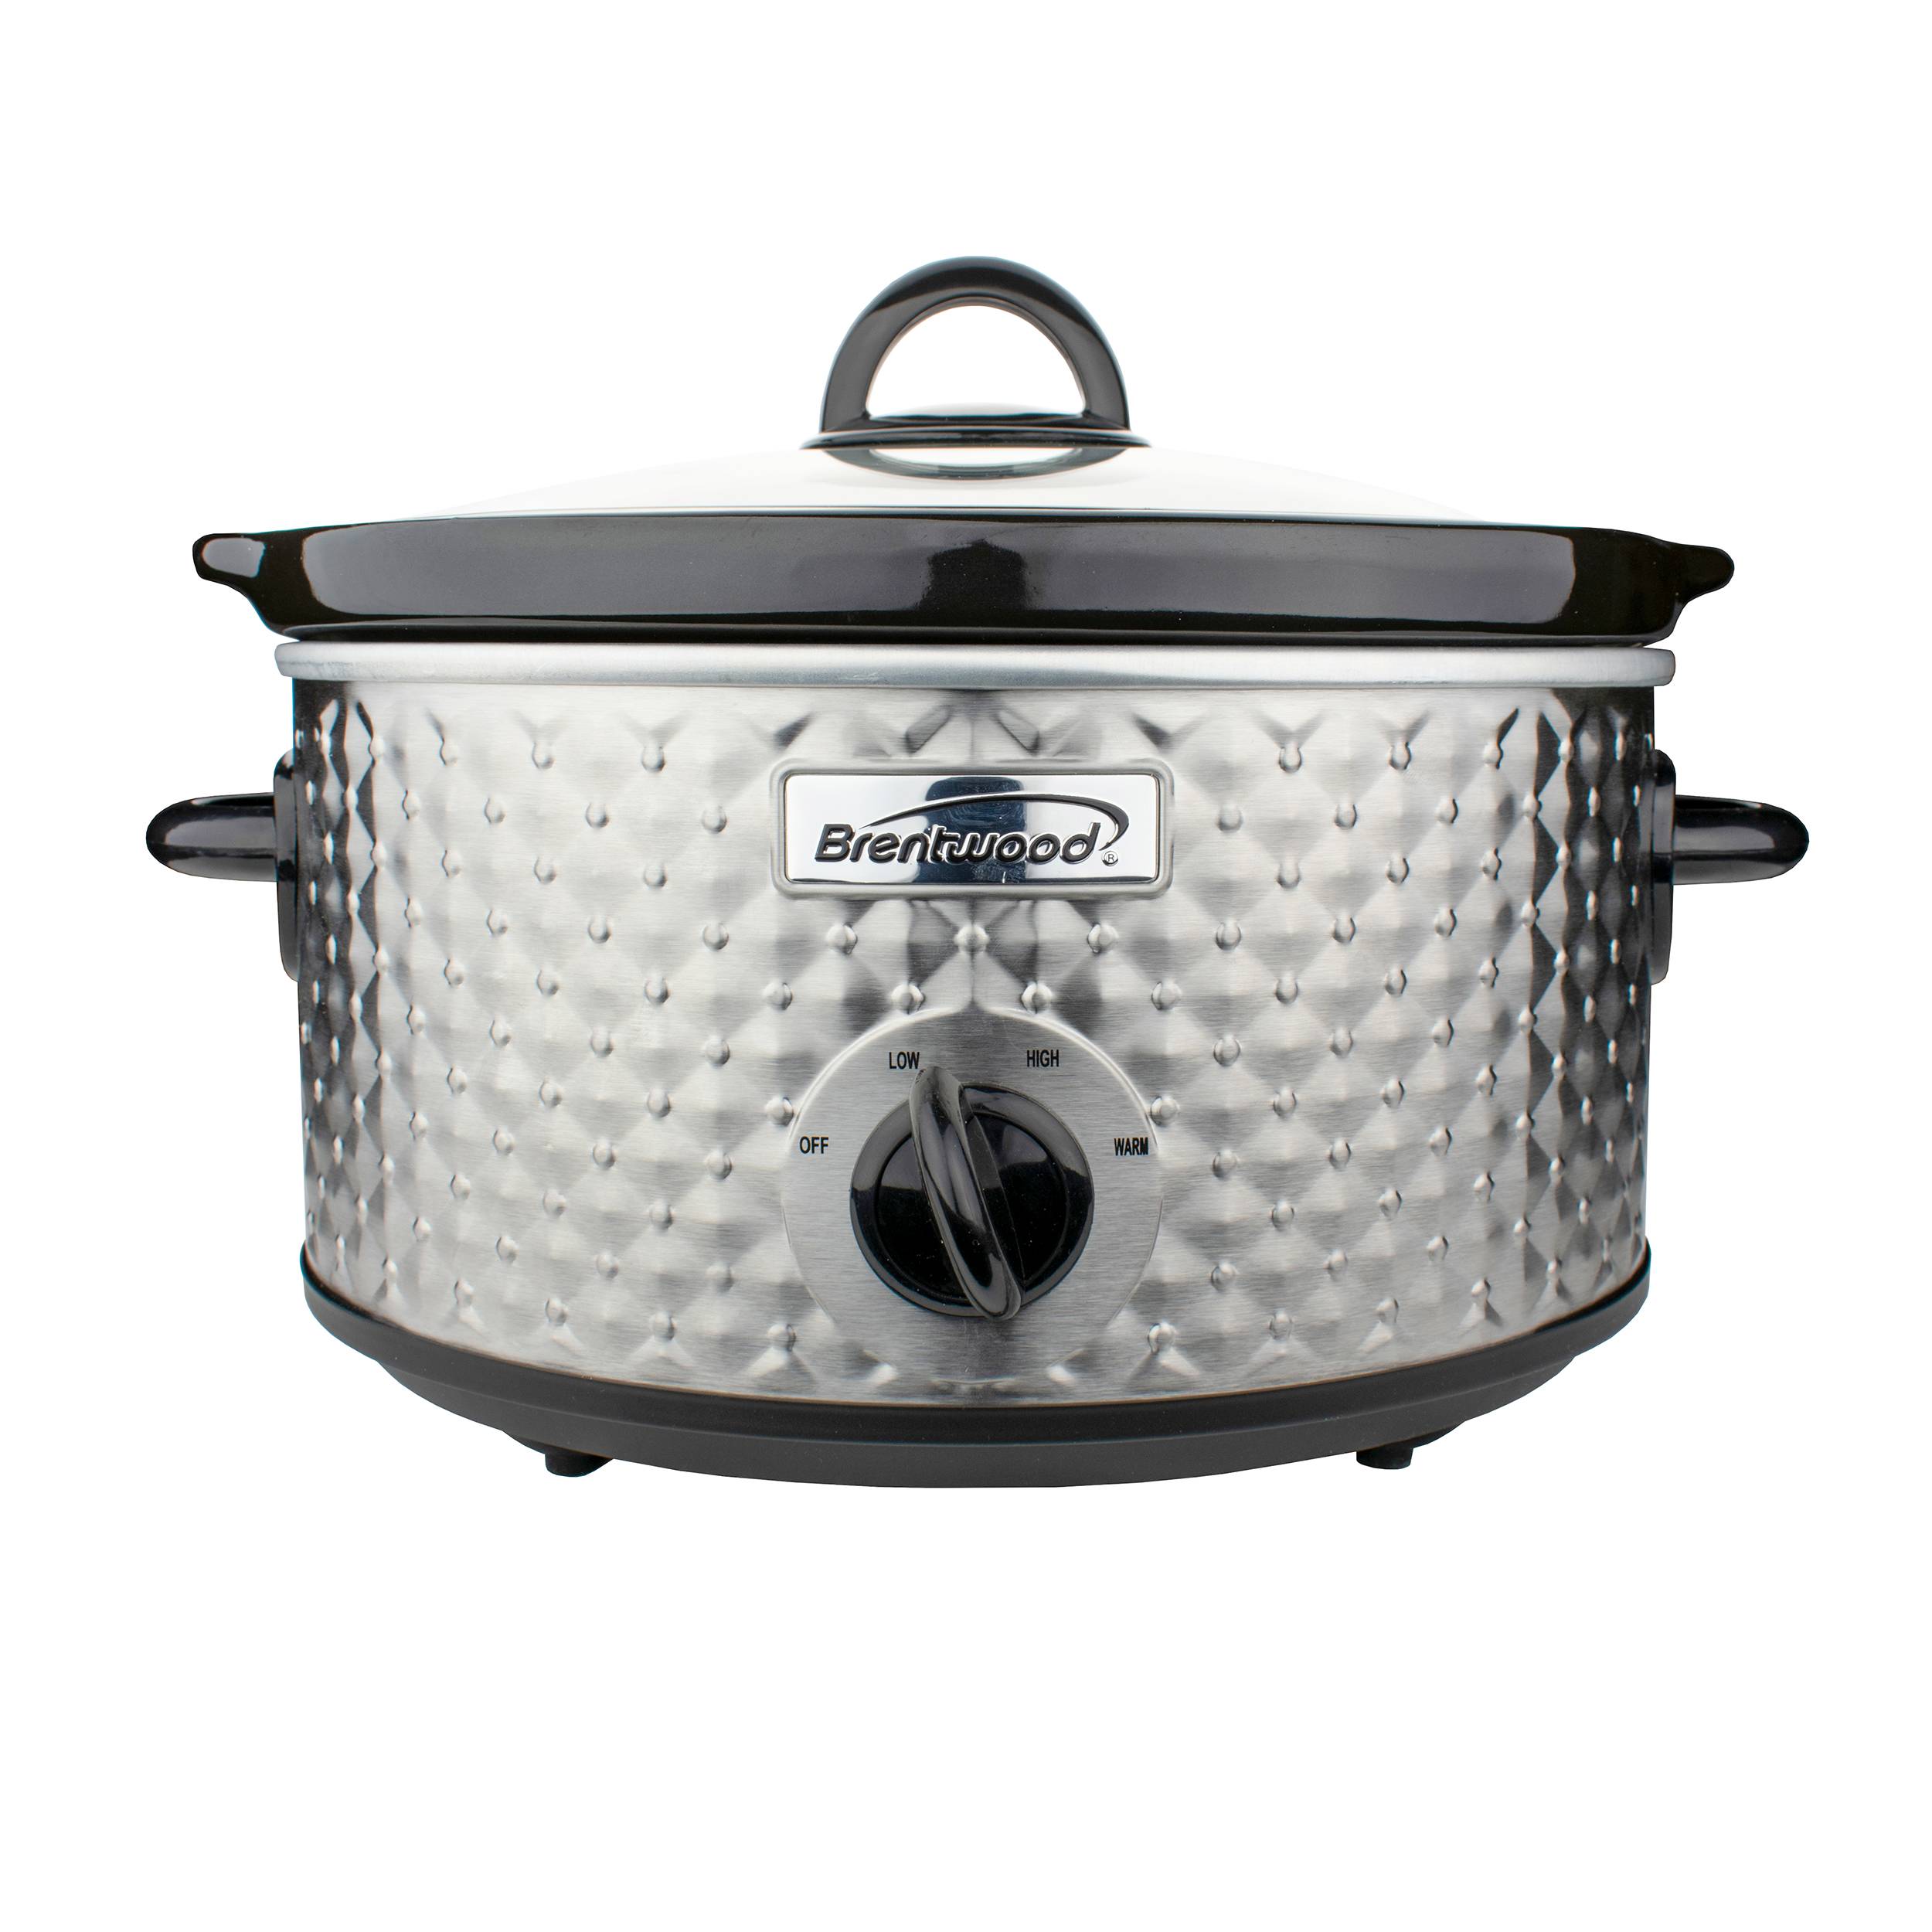 Mega Chef Triple Round Oval 1.5 Quart Stainless Steel Cooker